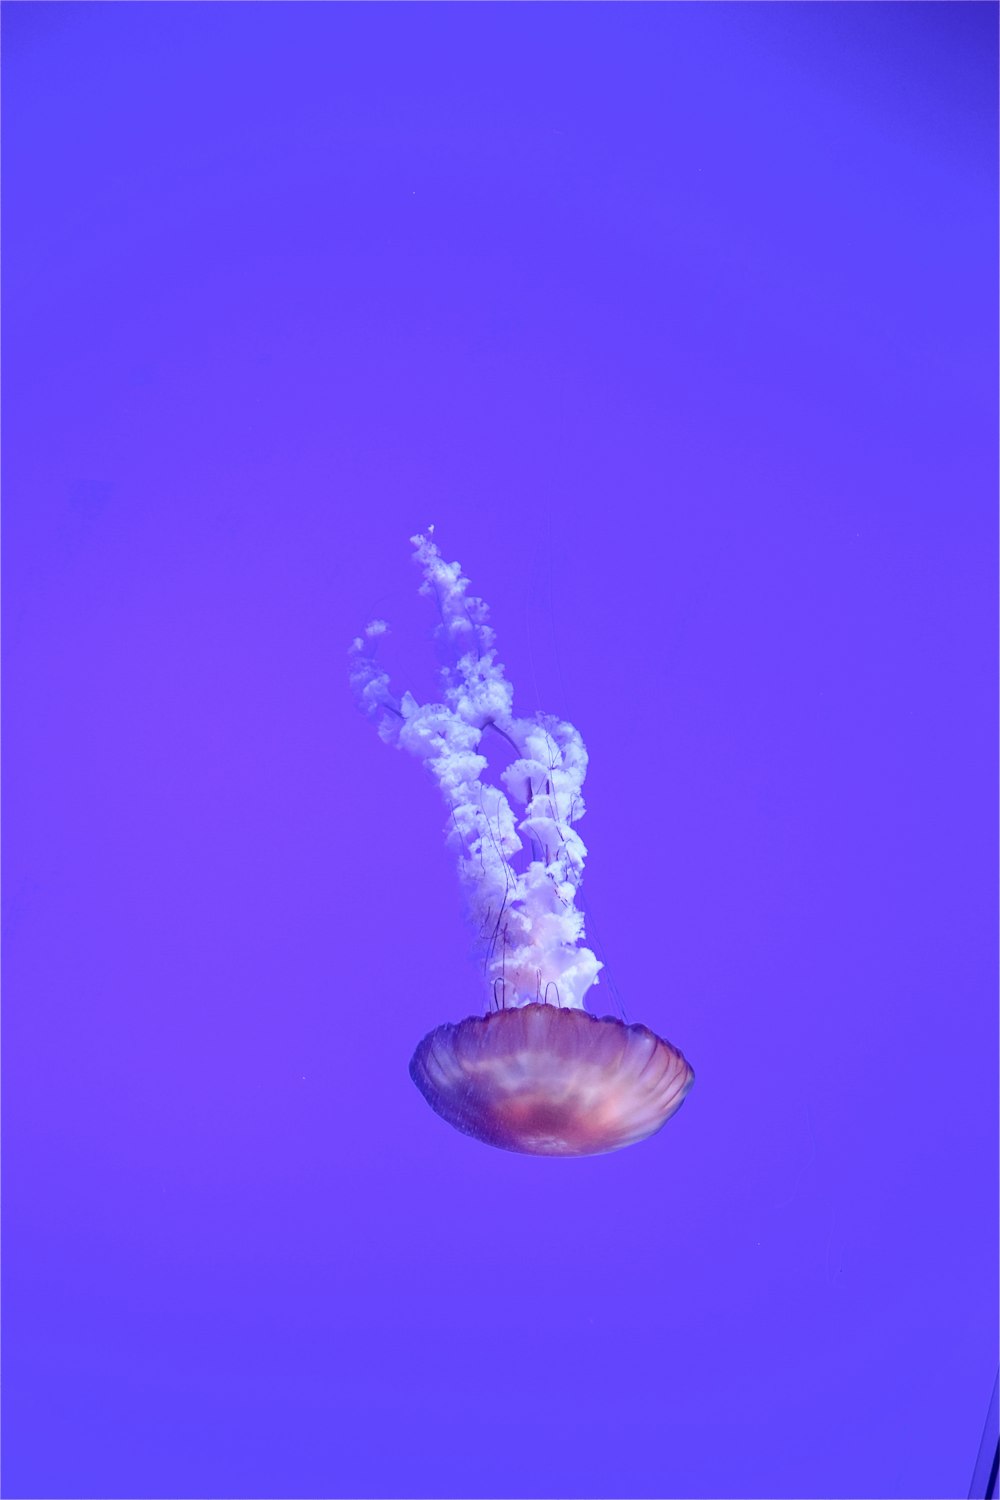 a jellyfish in the water with a purple background